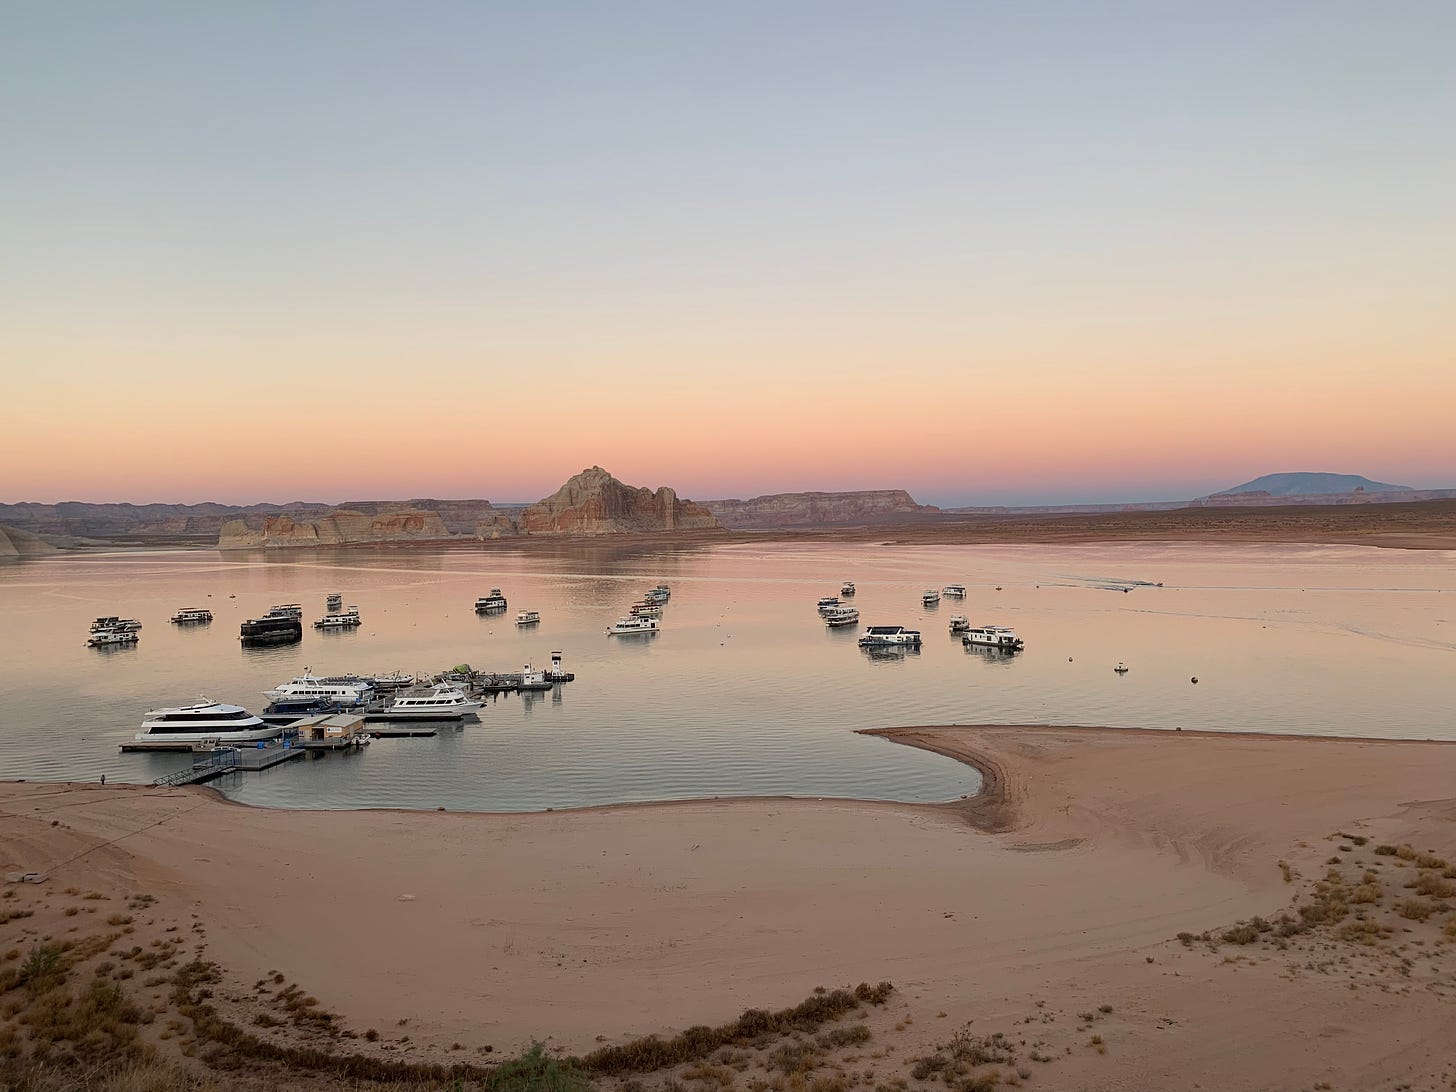 The sun sets in hazy orange and pink over a bay where houseboats dot the horizon and desert rocks rise in the background